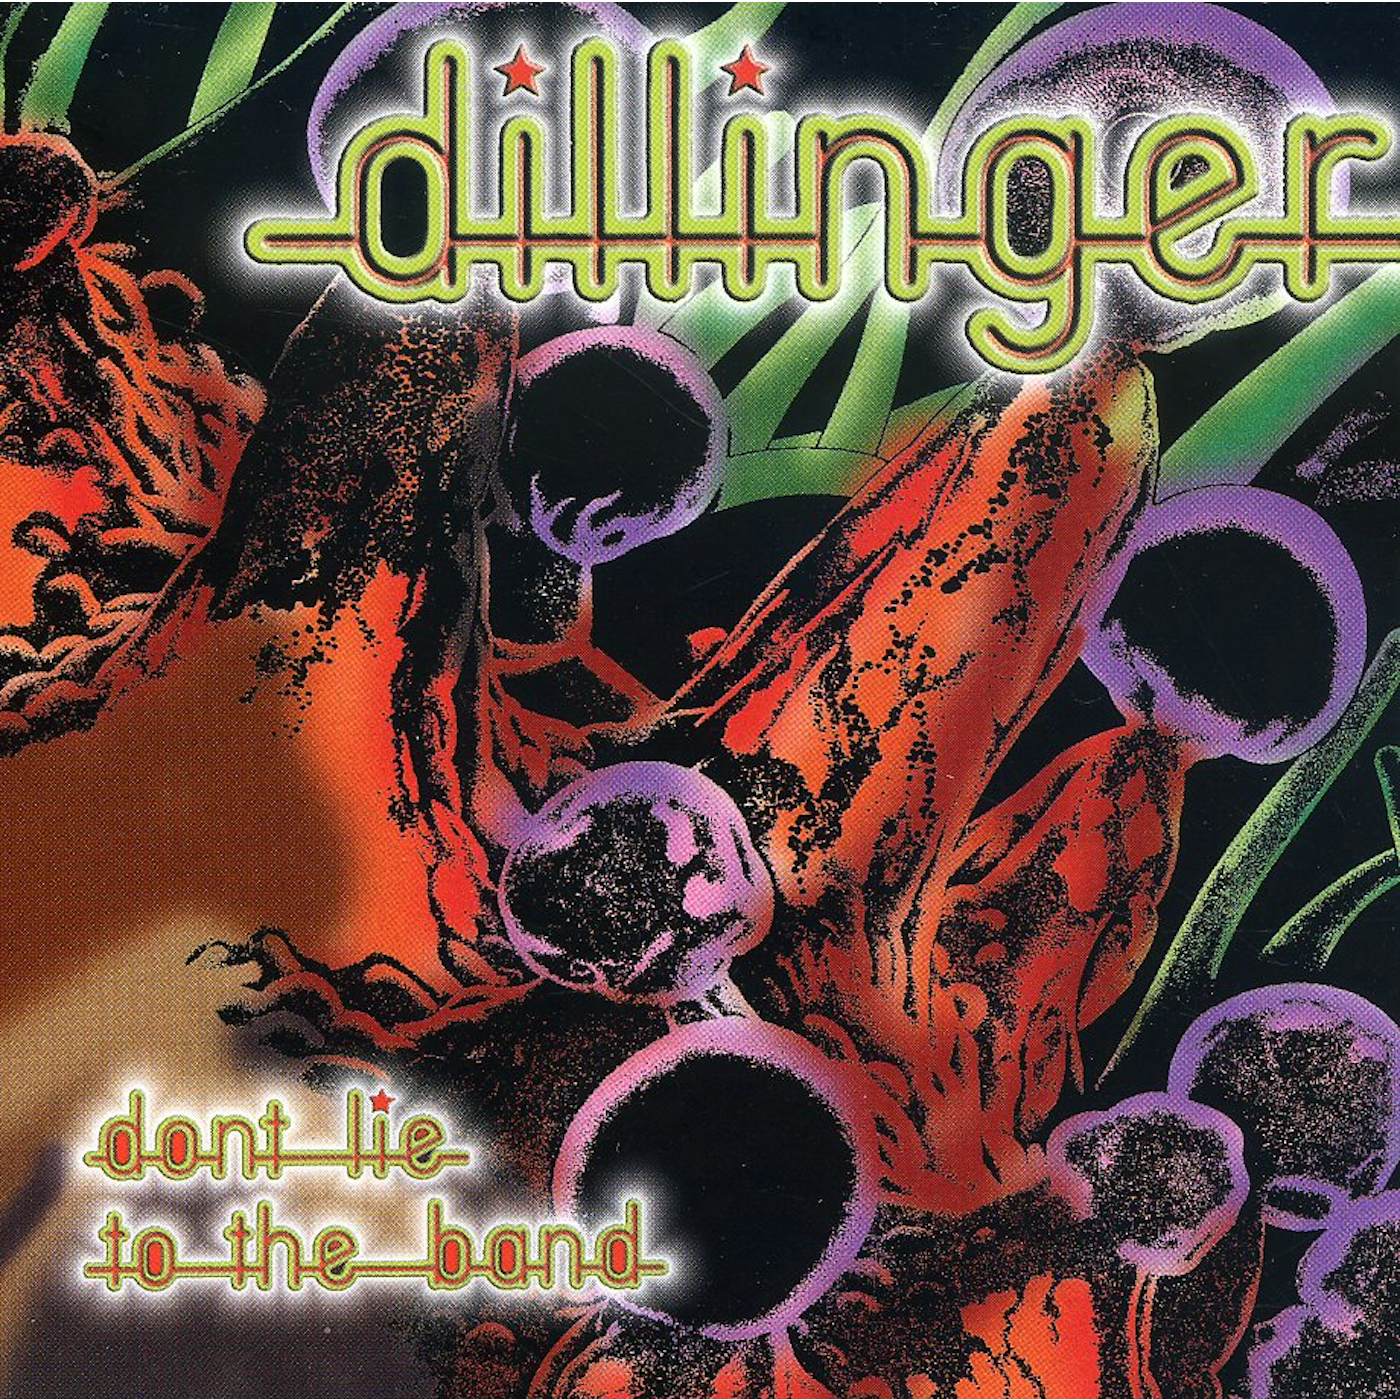 Dillinger DON'T LIE TO THE BAND CD